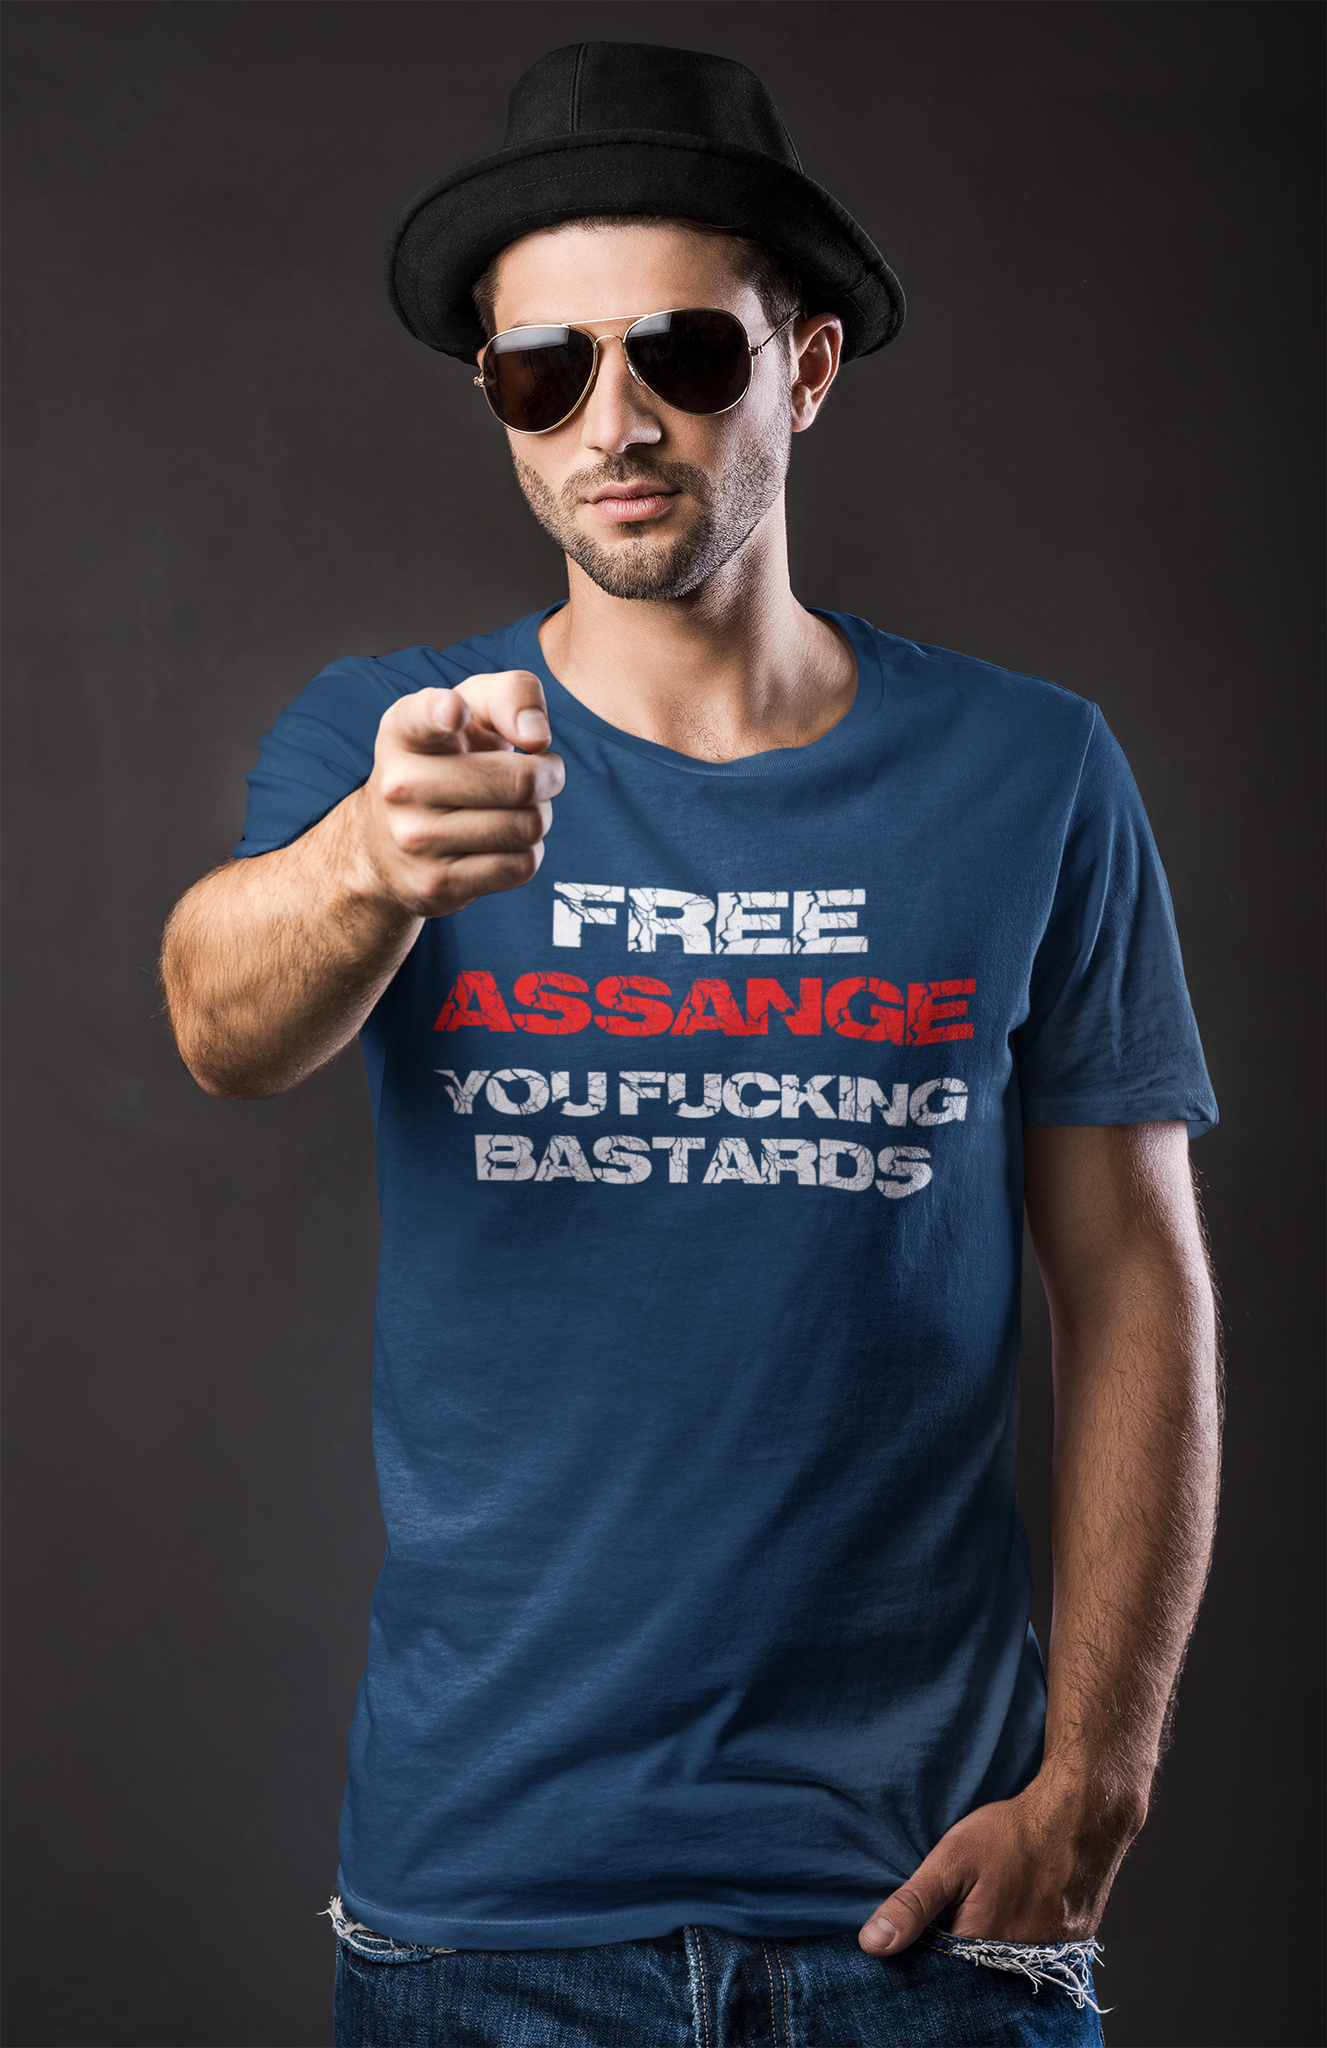 Men's T-shirt with the text Free Assange You Fucking Bastards and a message about protecting whistleblower rights